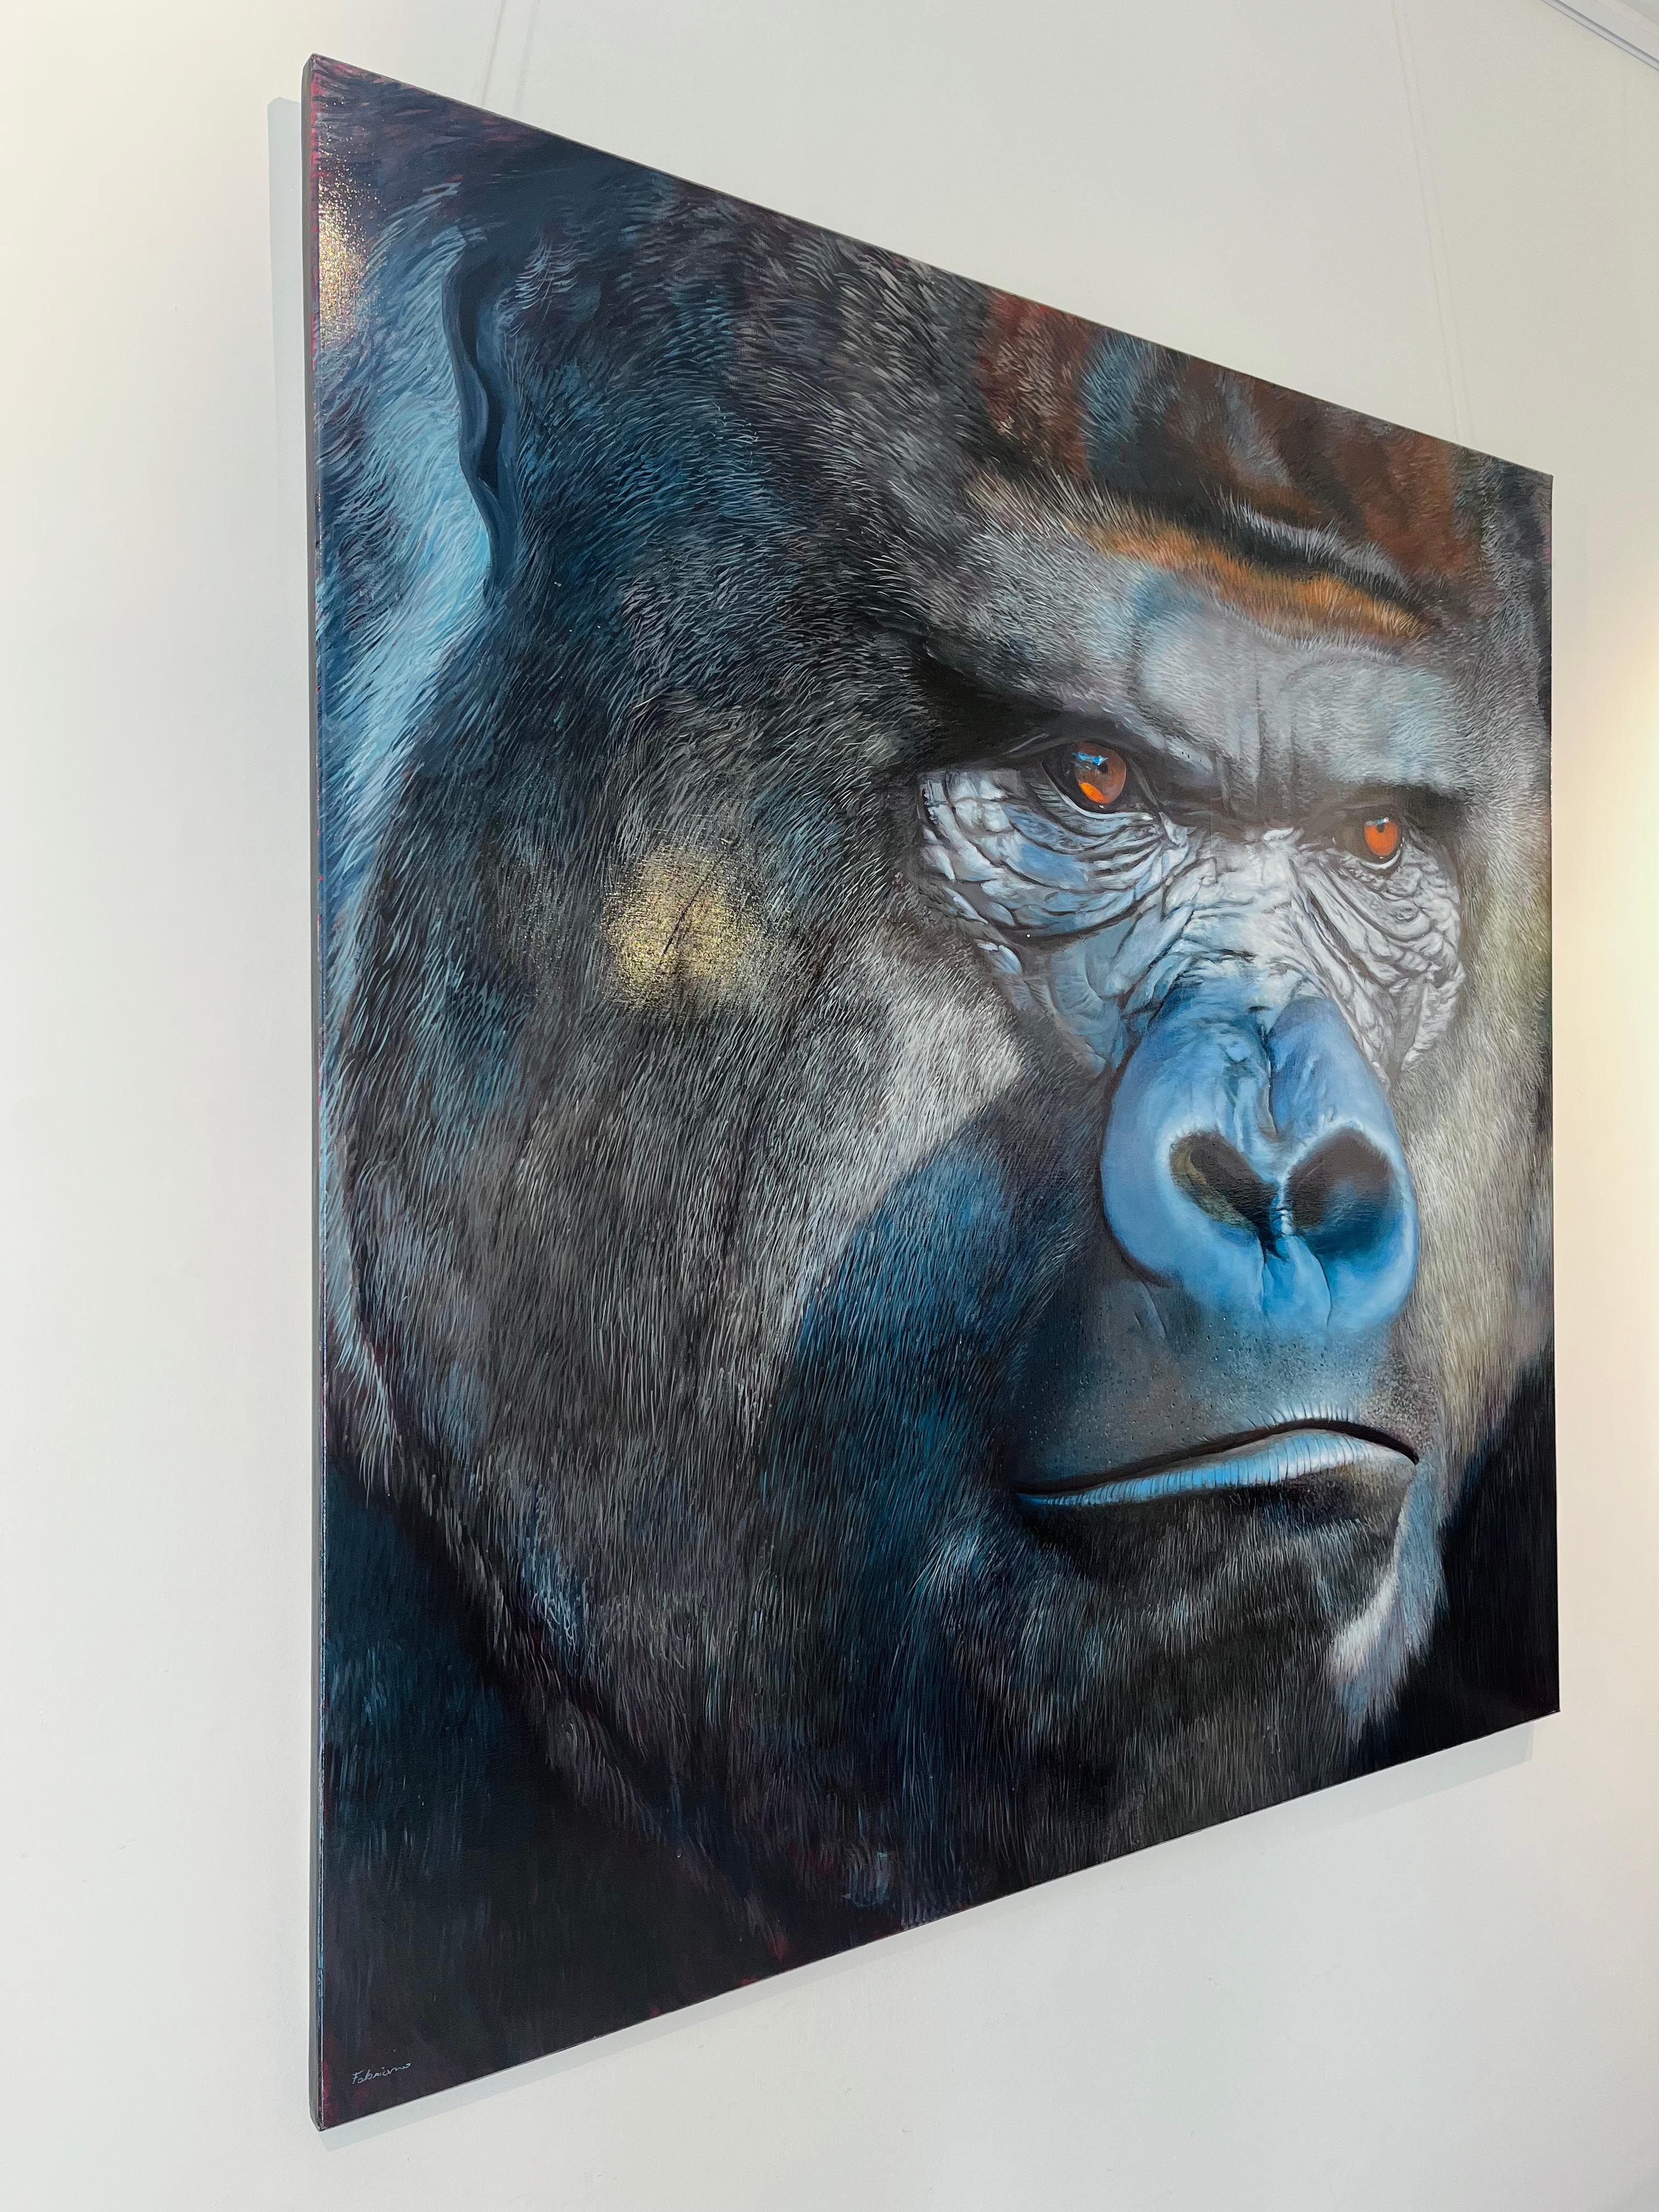 Gorilla-original hyper realism wildlife oil painting-artwork- contemporary Art - Abstract Impressionist Painting by Fabriano